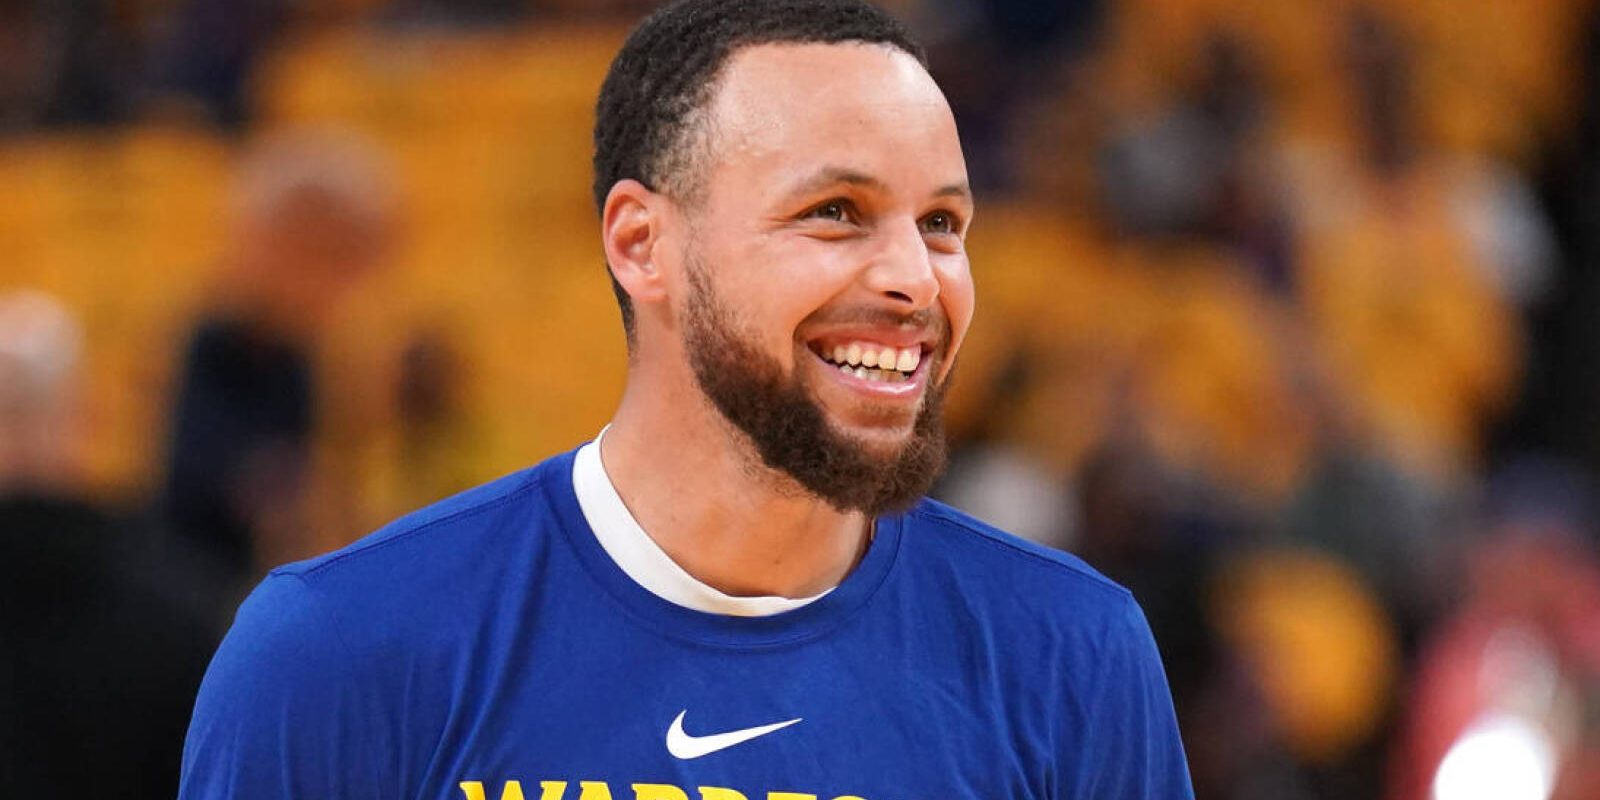 Apr 28, 2023; San Francisco, California, USA; Golden State Warriors guard Stephen Curry (30) smiles during warmups against the Sacramento Kings during game six of the 2023 NBA playoffs at the Chase Center. Mandatory Credit: Cary Edmondson-USA TODAY Sports